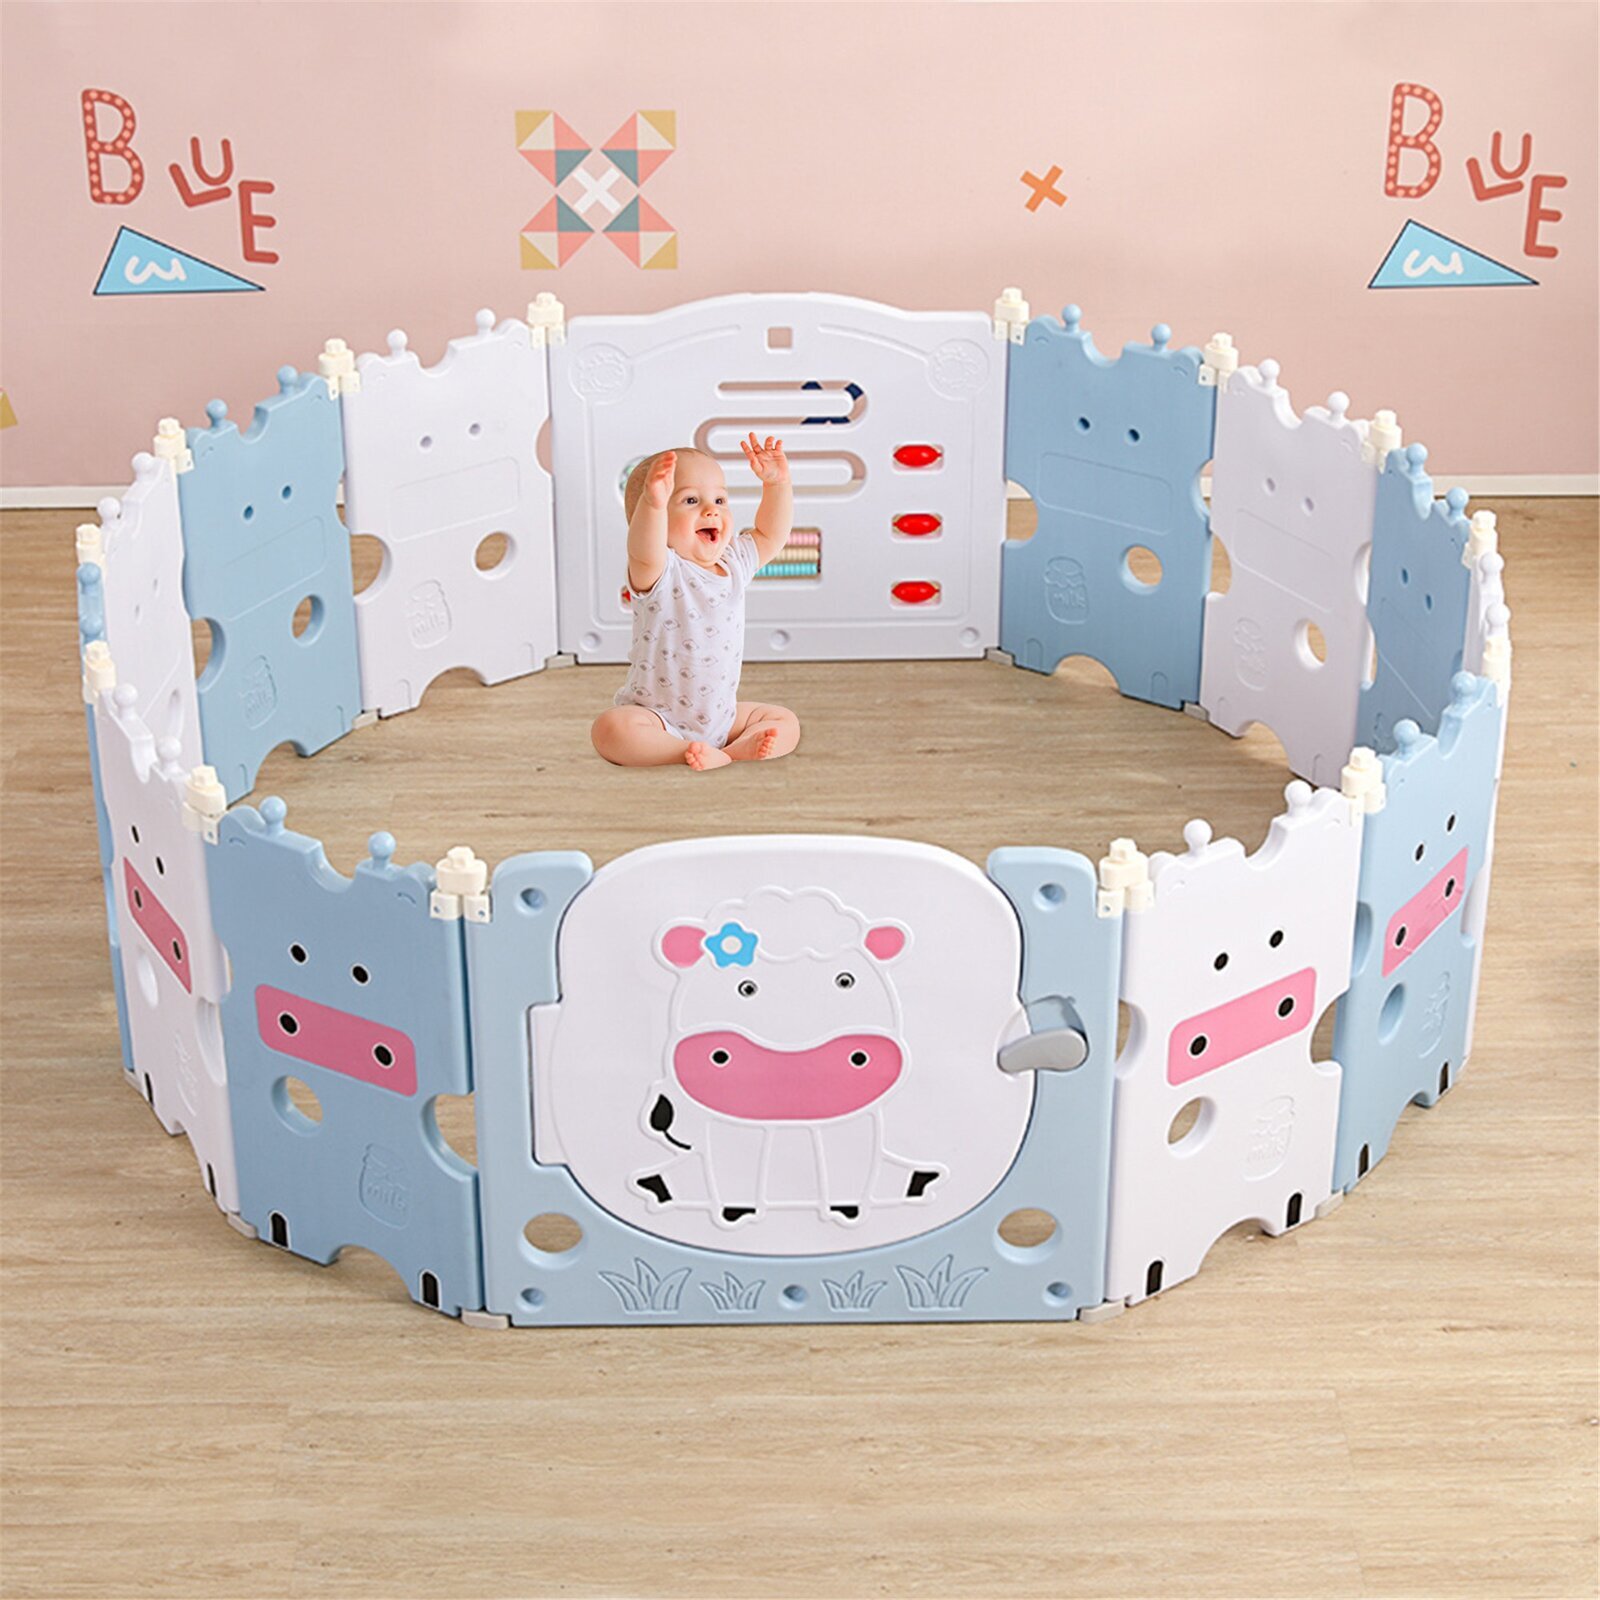 Large playpen with an adorable pastel cow theme